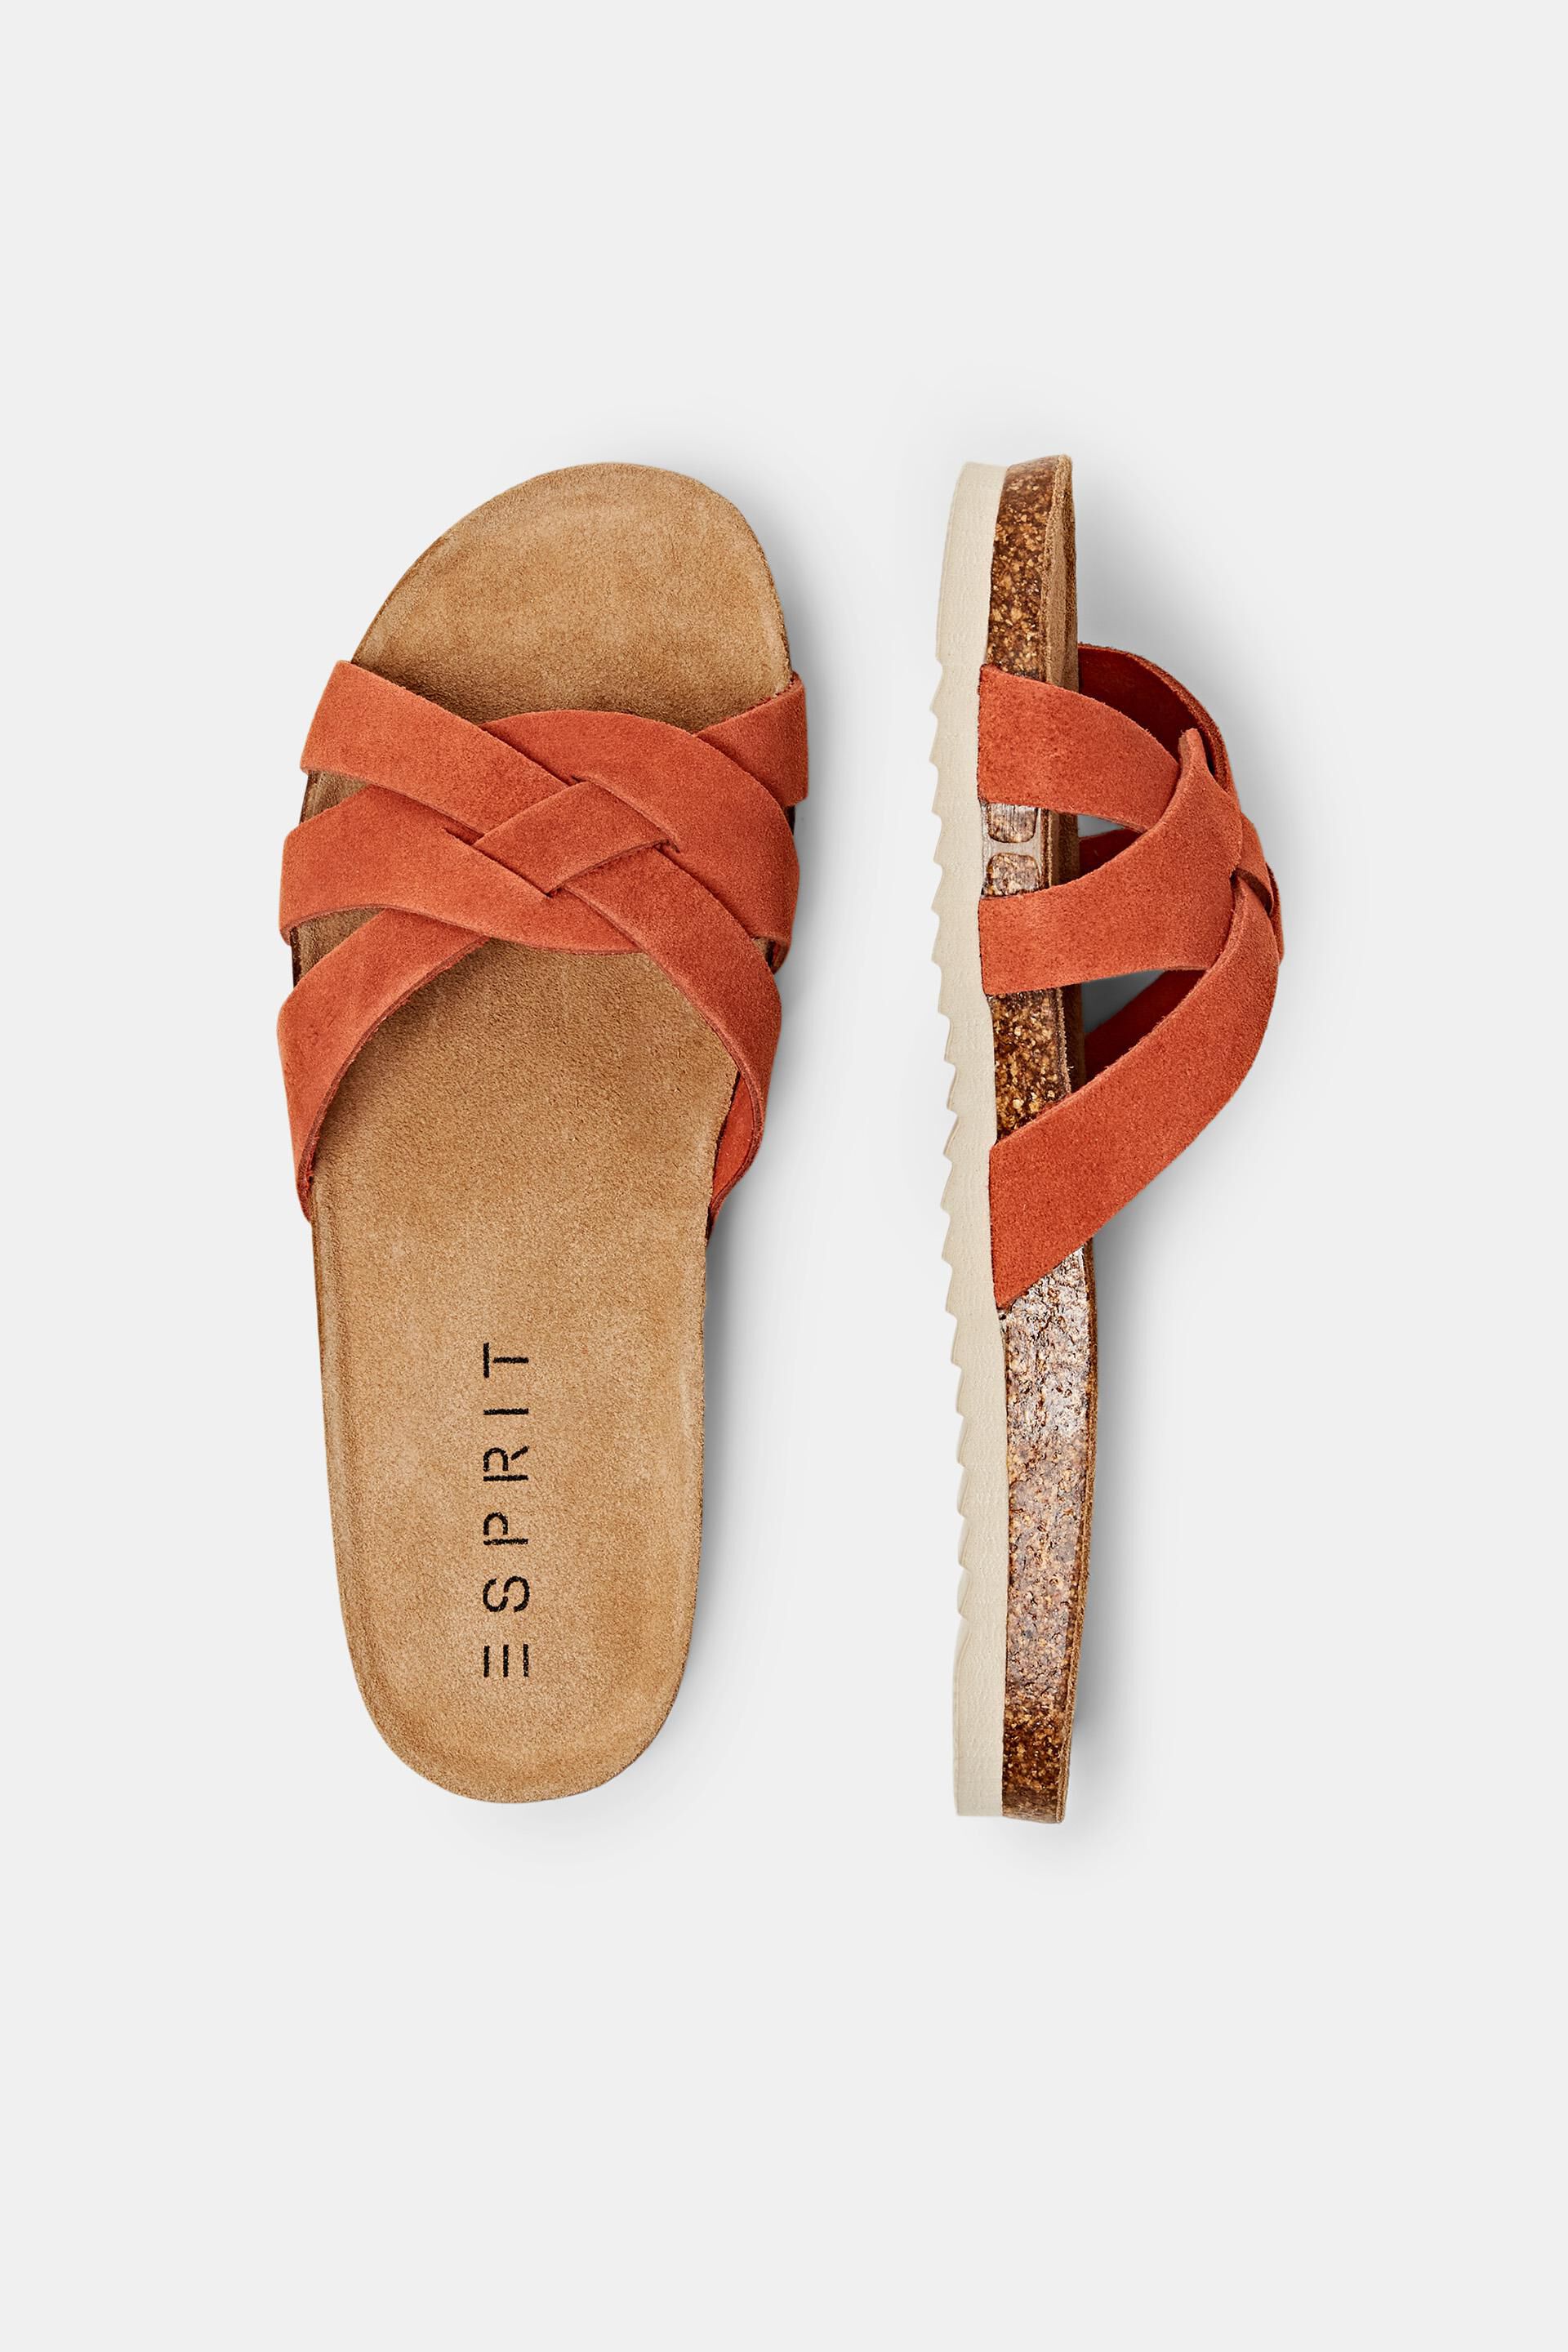 investering viering Macadam ESPRIT - Suede leather slide sandals at our online shop